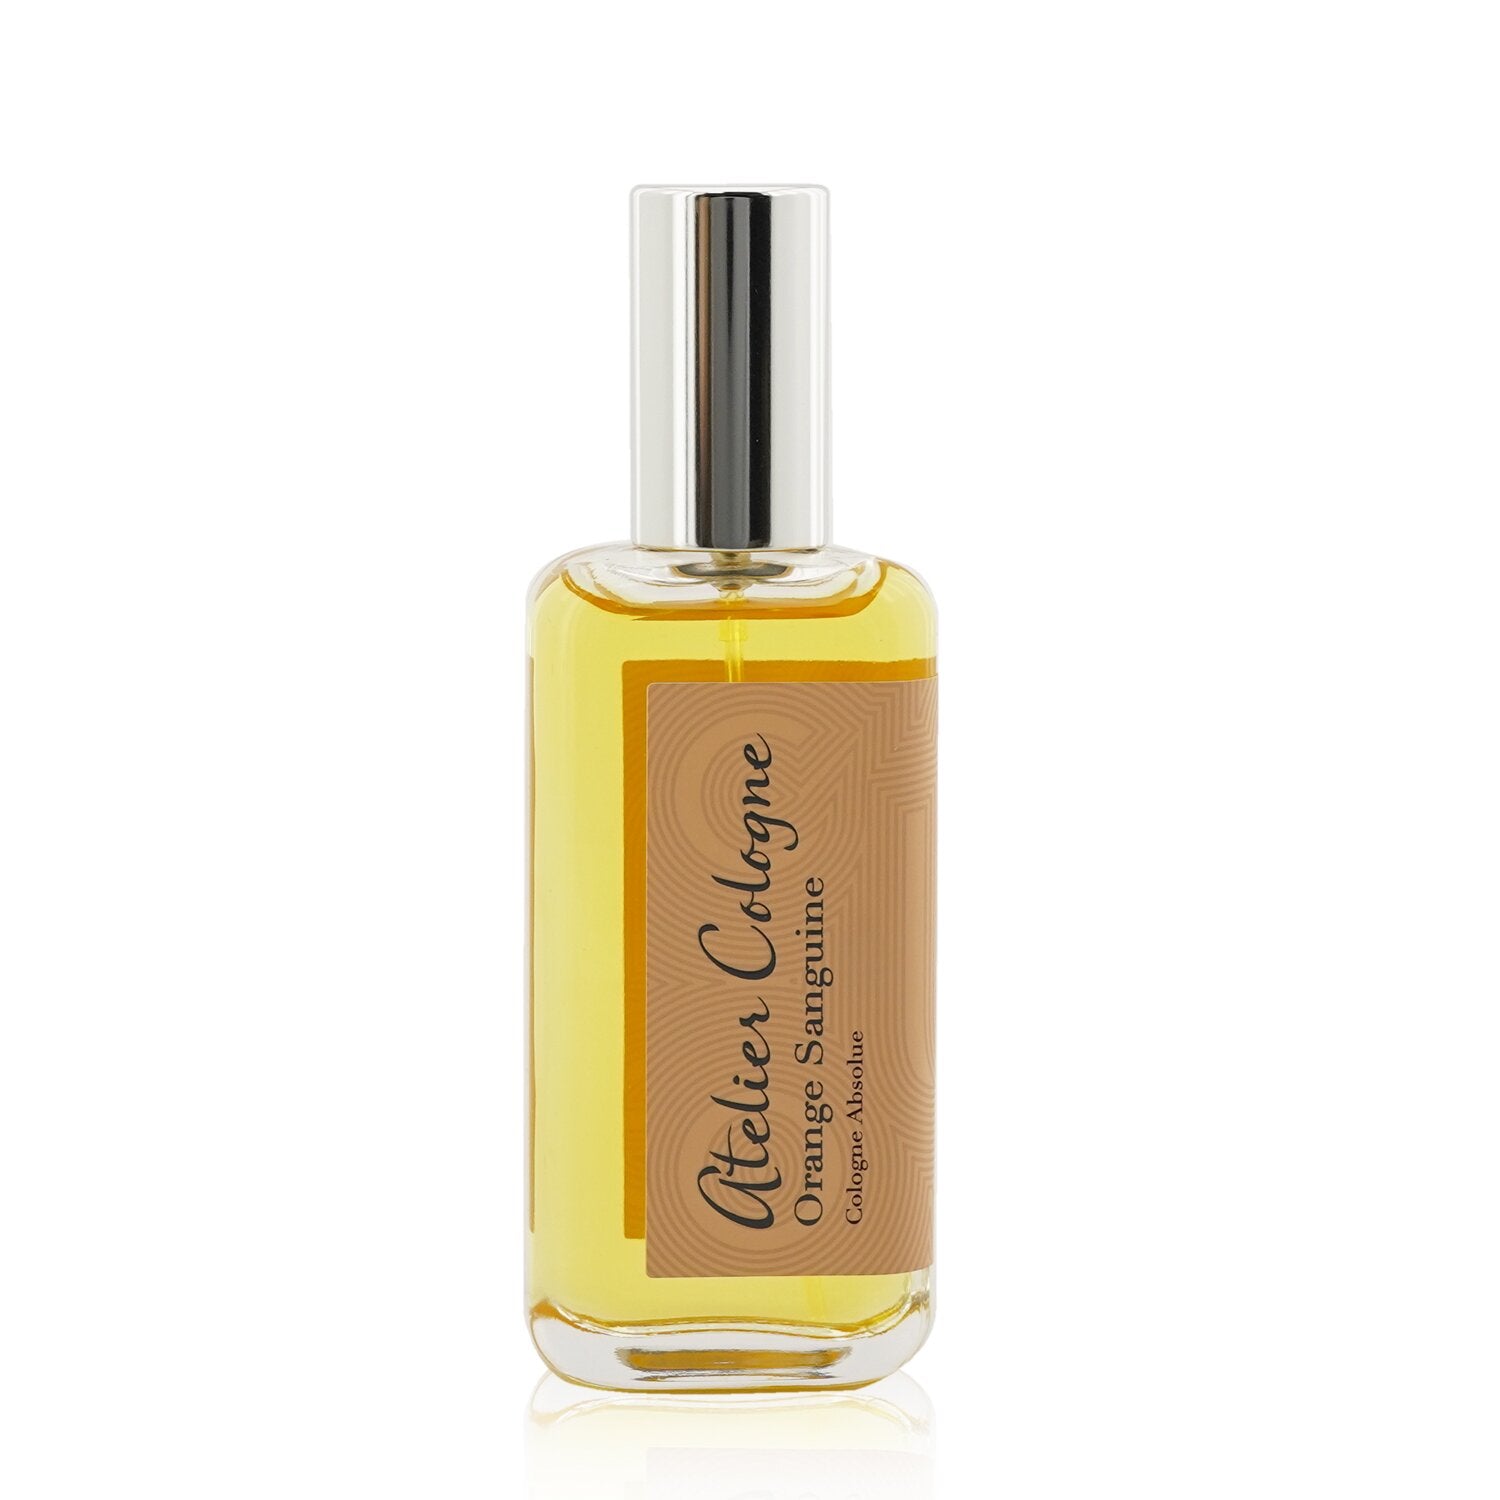 Atelier Cologne Gold Leather Cologne Absolue, 200 mL with Personalized  Travel Spray, 30 mL